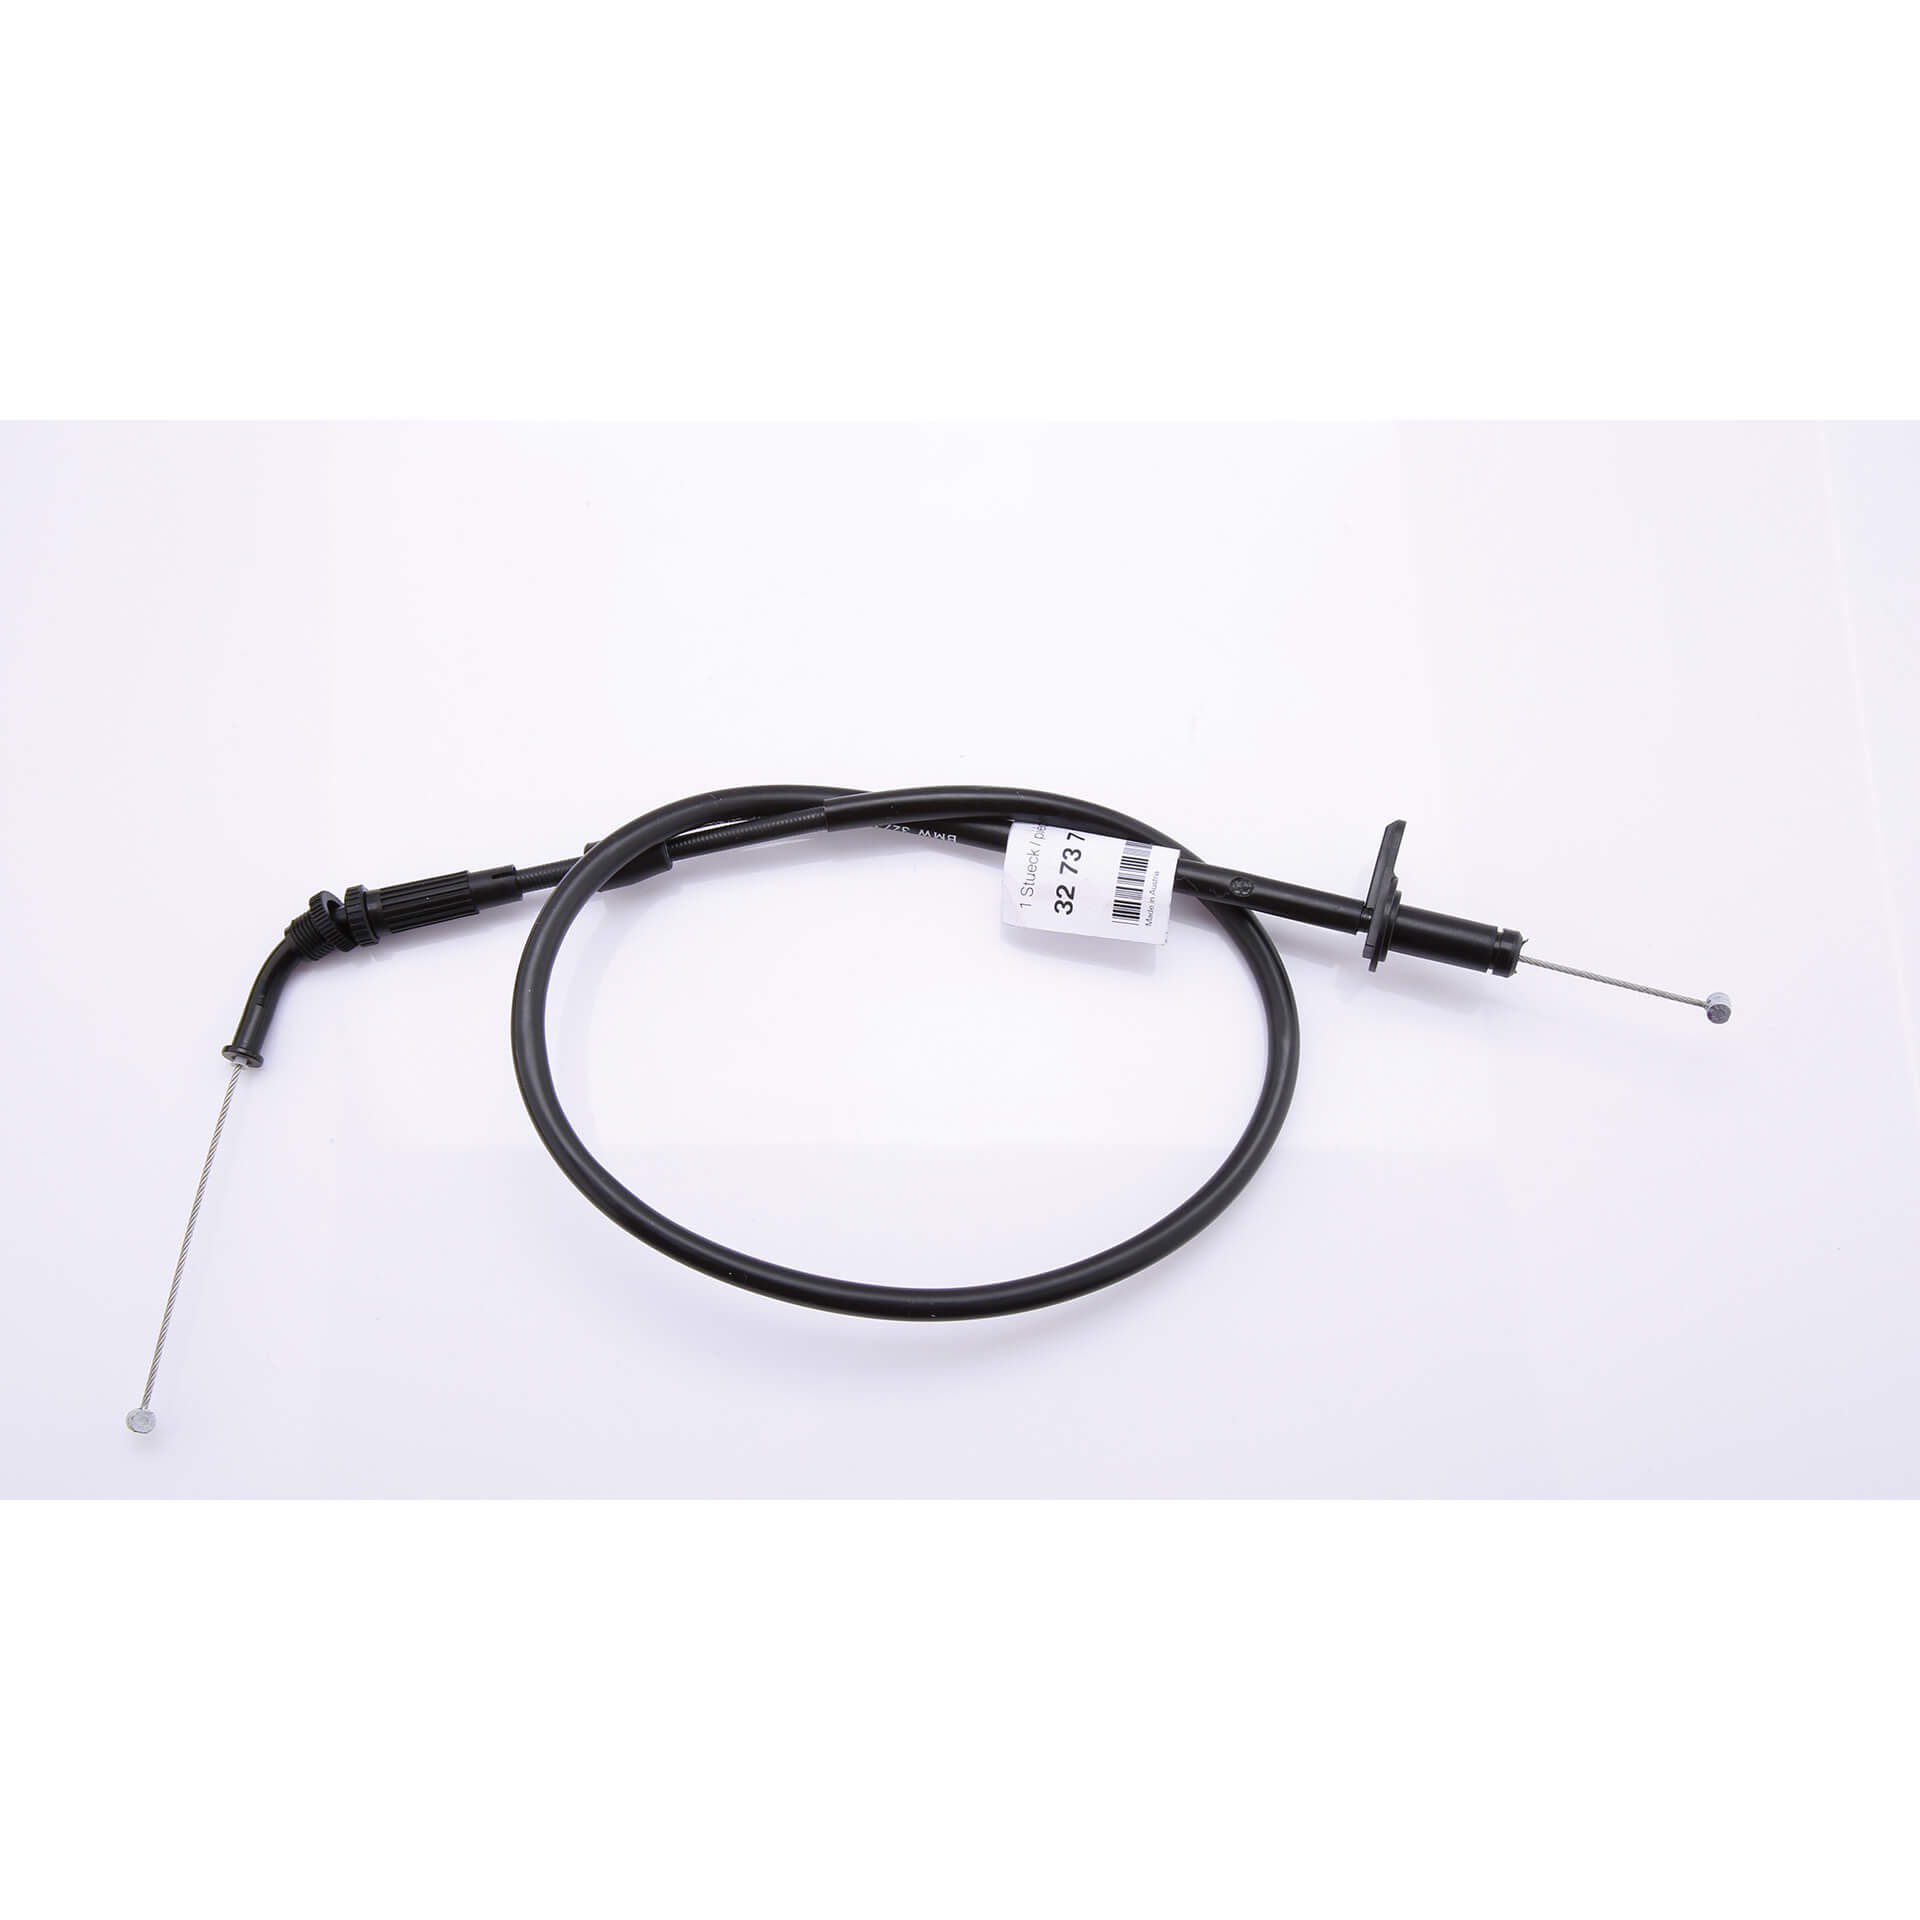 lsl Spare part, throttle cable, normally open contact, for SB-Kit K 1300 R